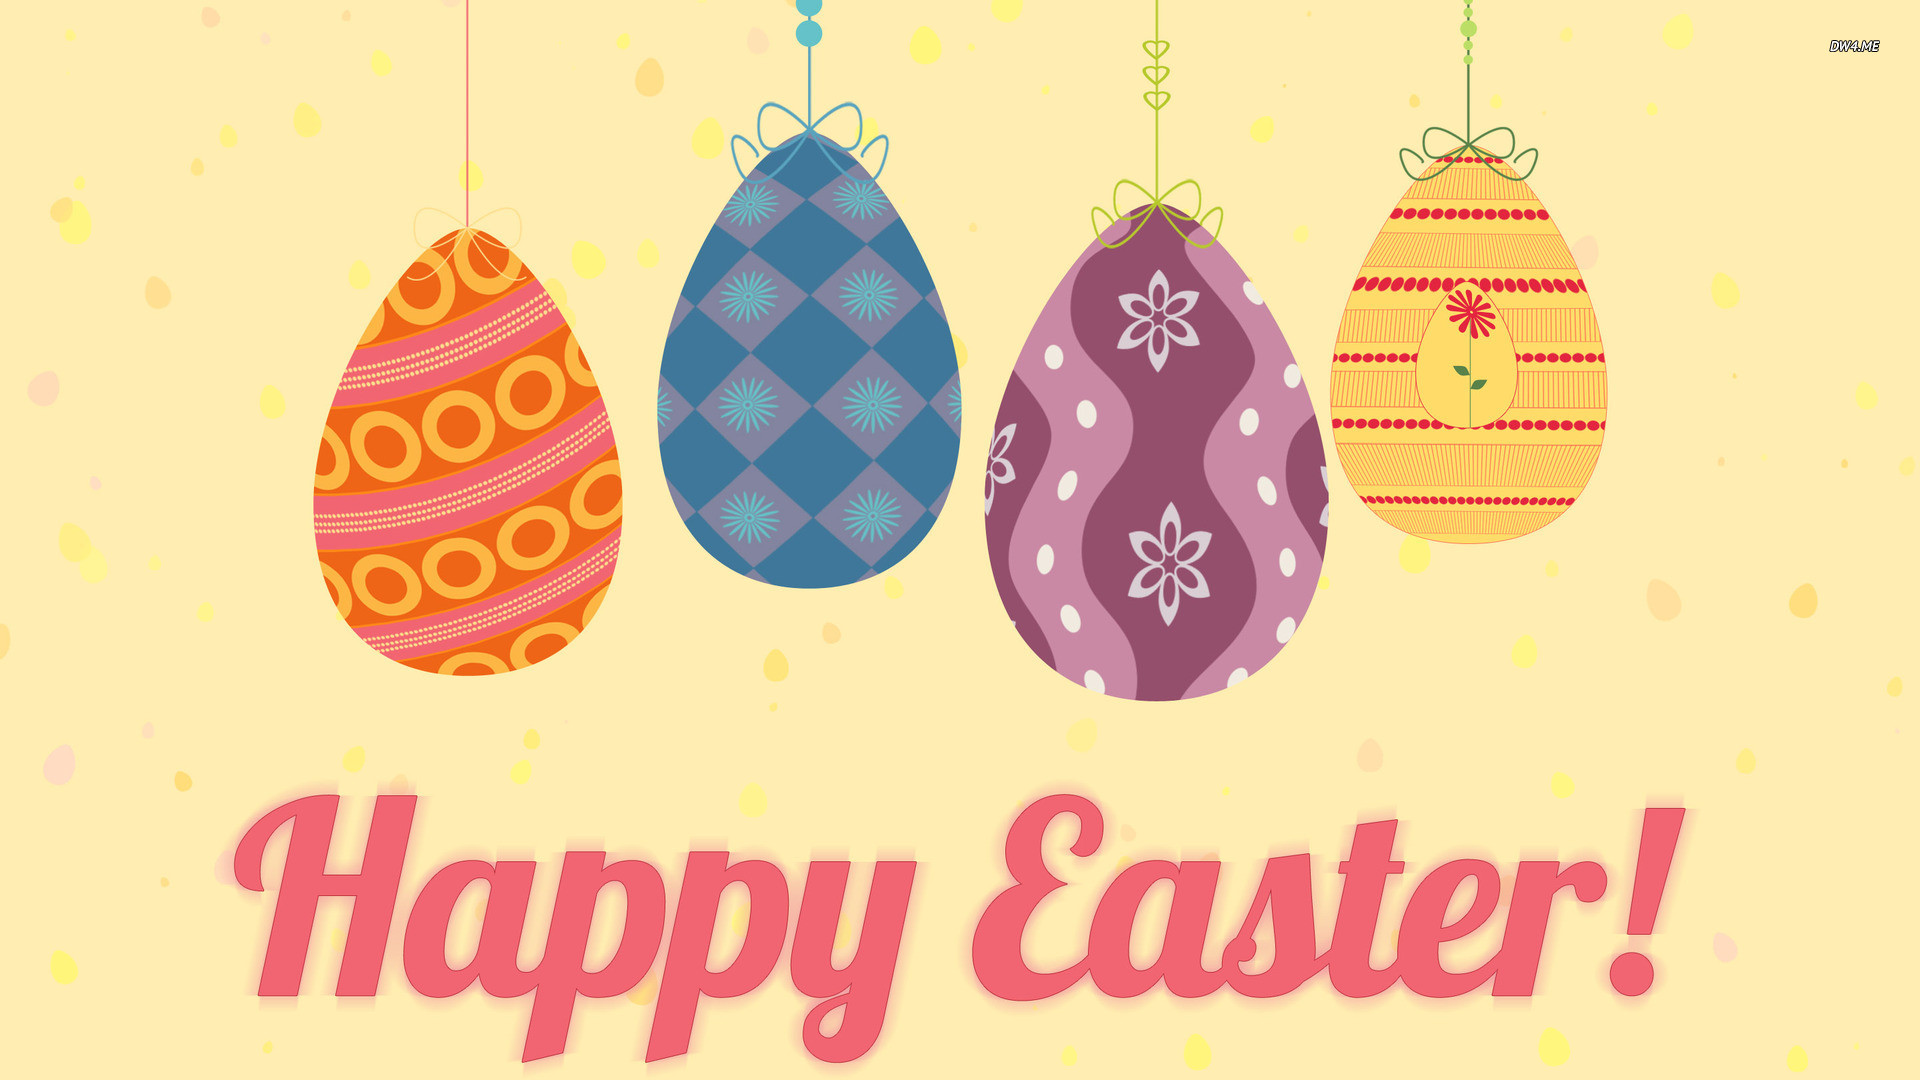 1920x1080 happy easter wallpapers hd wallpapers free 4k amazing artwork background  wallpapers colourful samsung phone wallpapers 1920Ã1080 Wallpaper HD